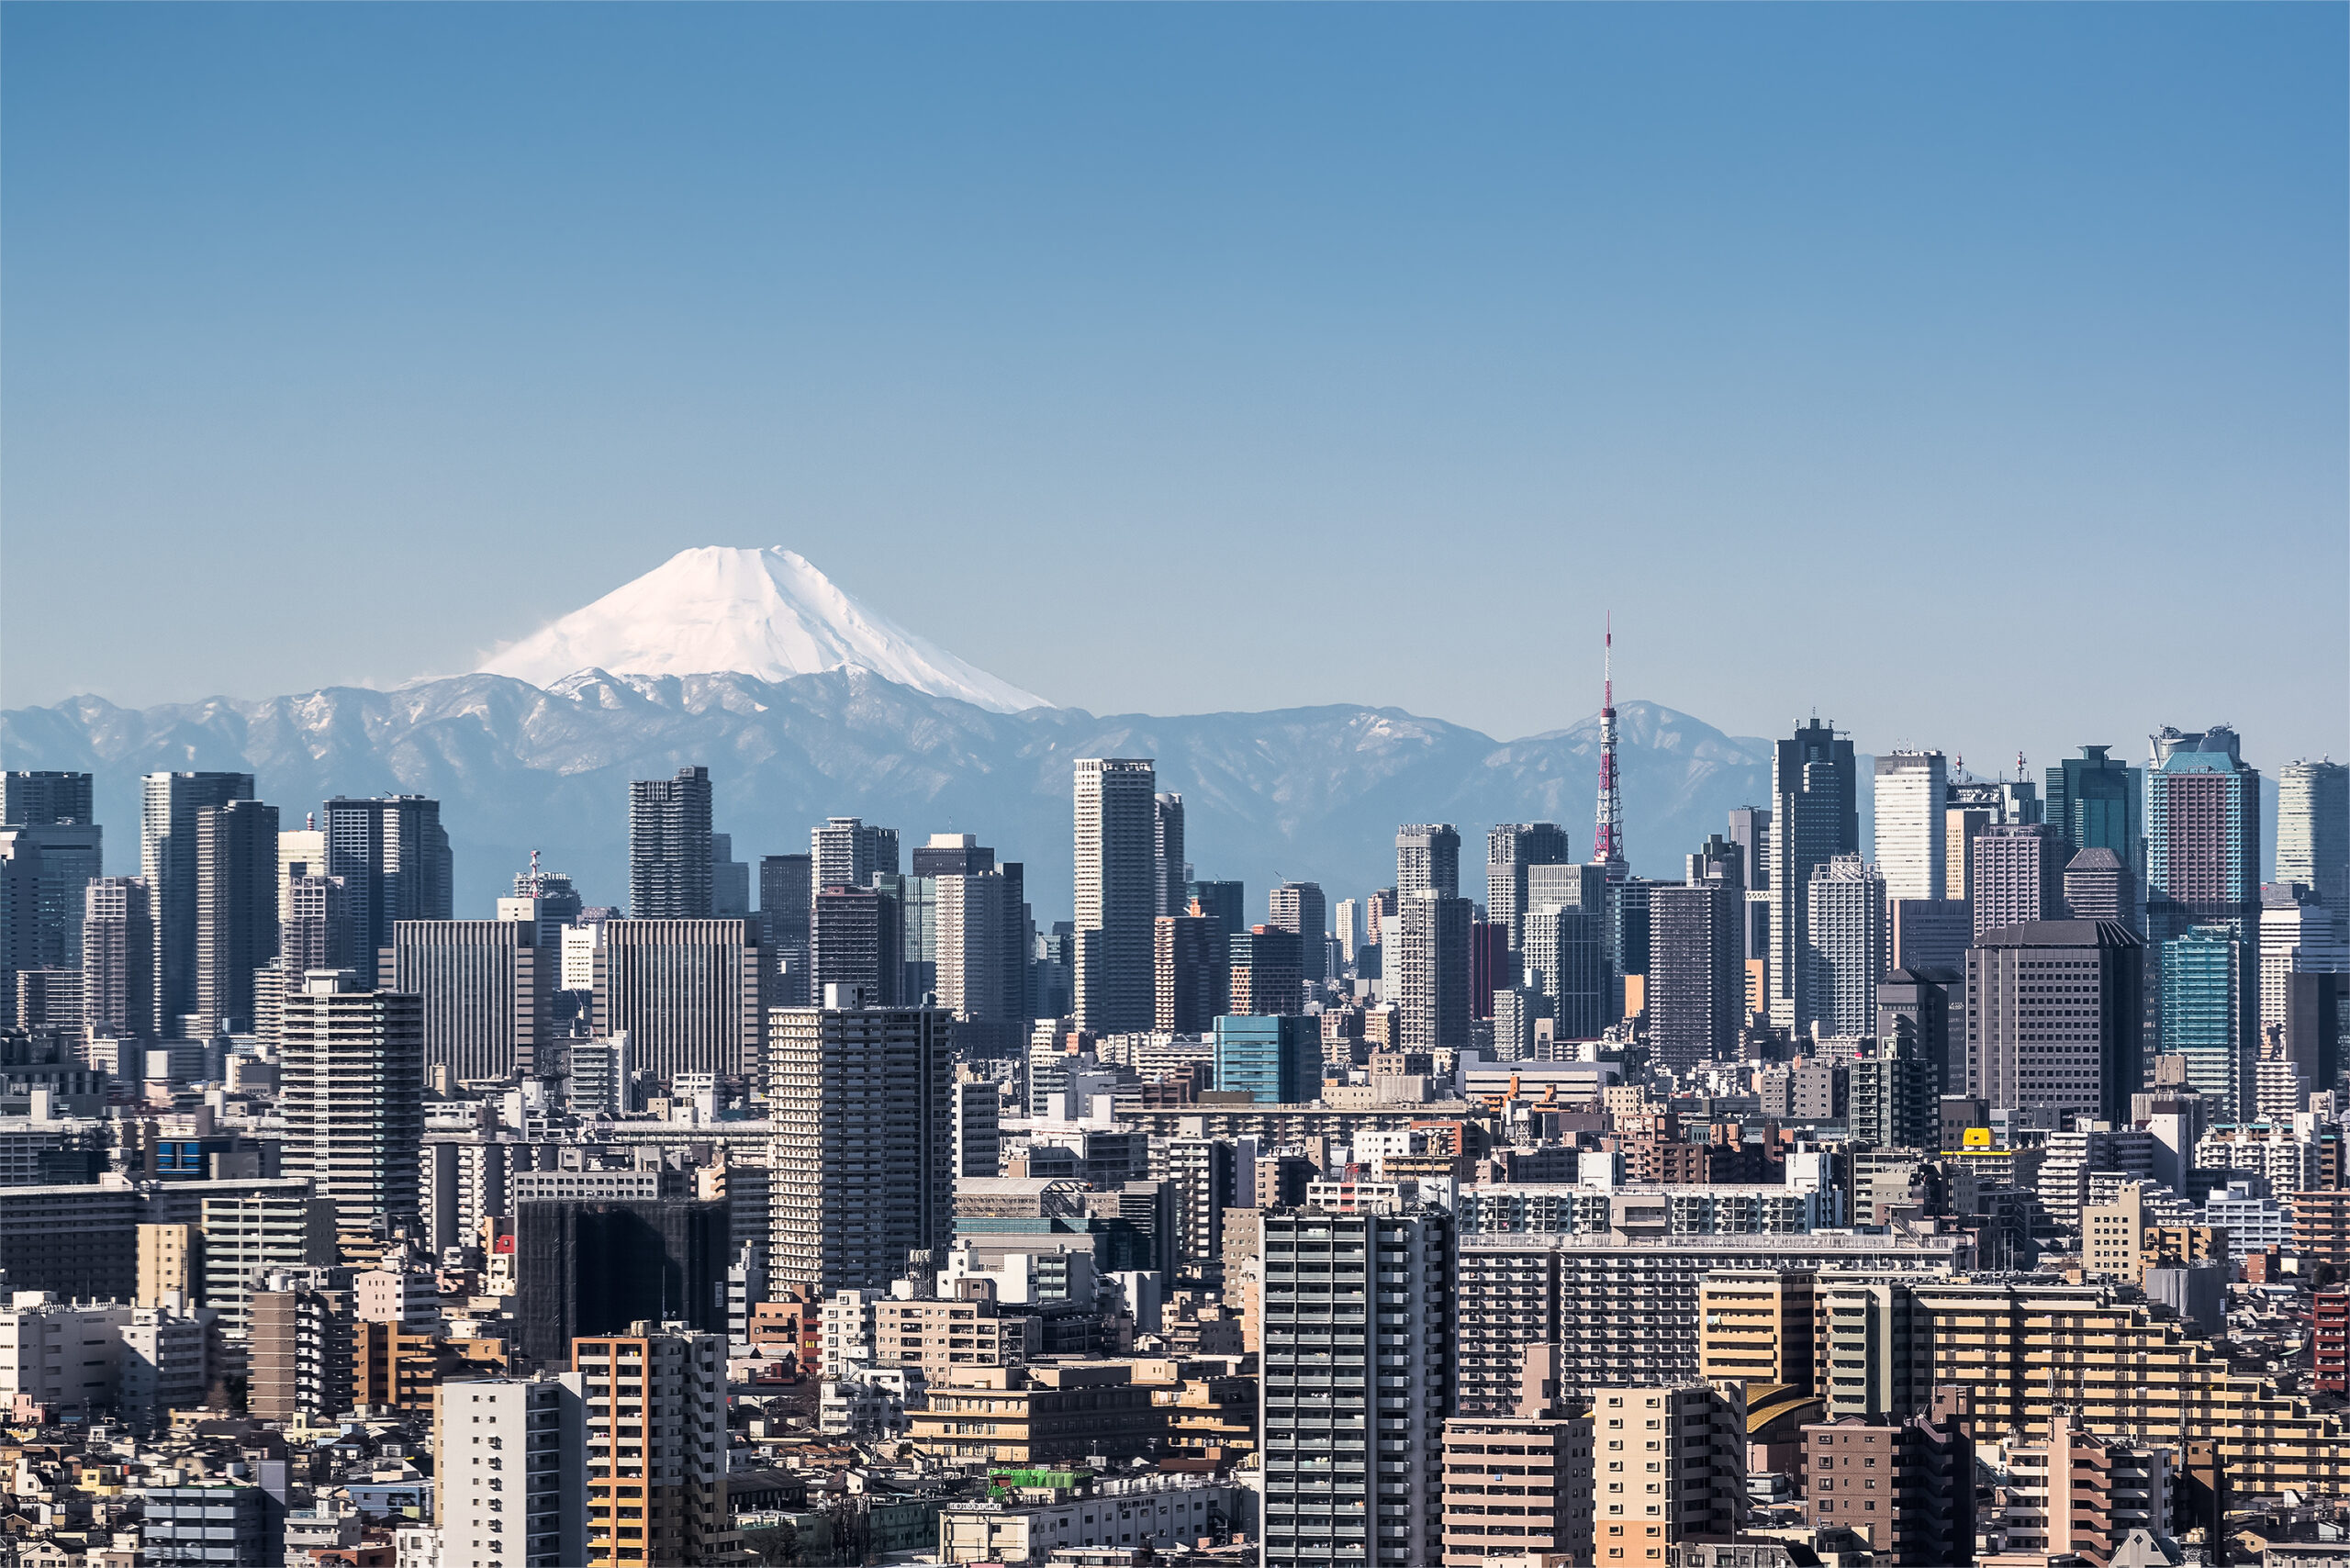 Tokyo City View , Tokyo Downtown Building And Tokyo Tower Landmark With Mountain Fuji On A Clear Day. Tokyo Metropolis Is The Capital Of Japan And One Of Its 47 Prefectures.